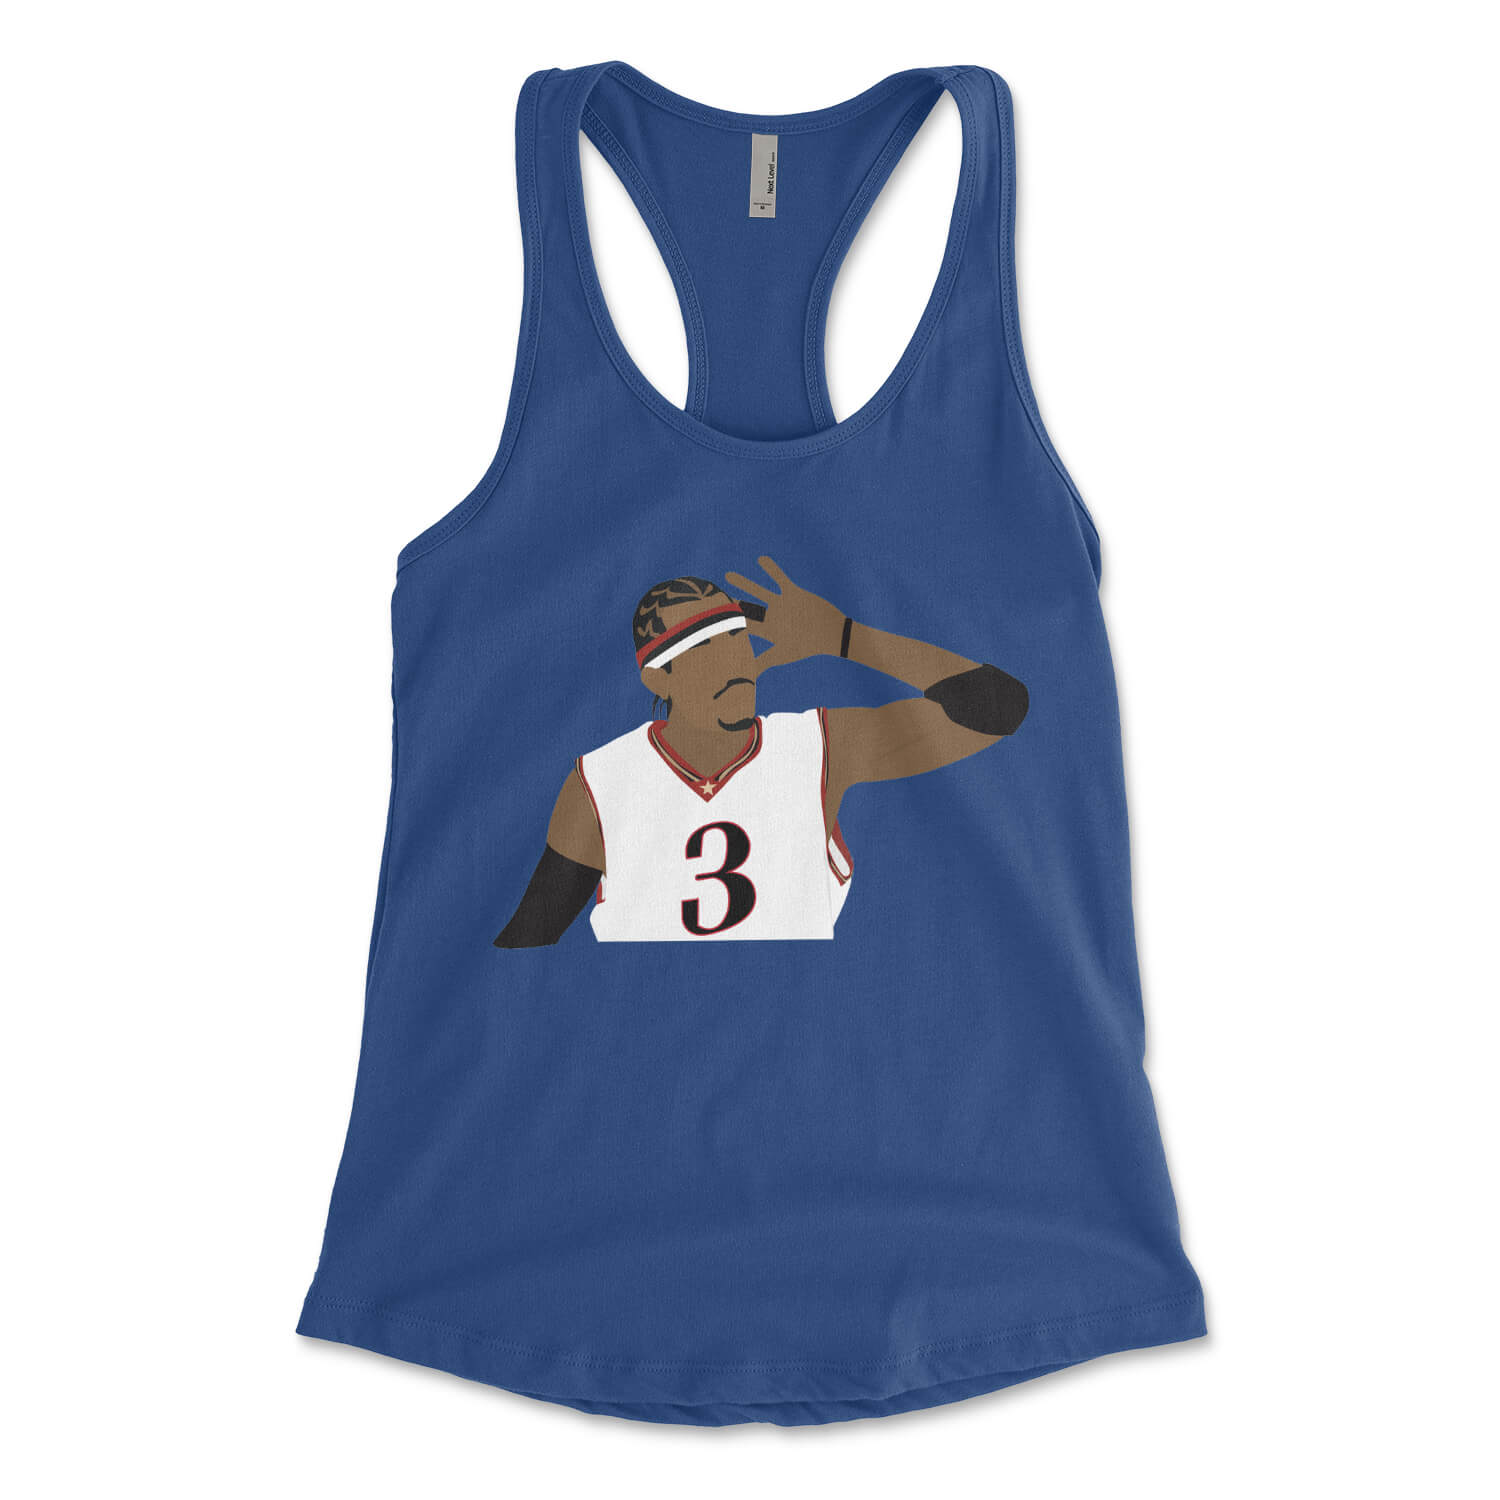 Philadelphia 76ers Allen Iverson Sixers womens royal blue racerback tank top from Phillygoat